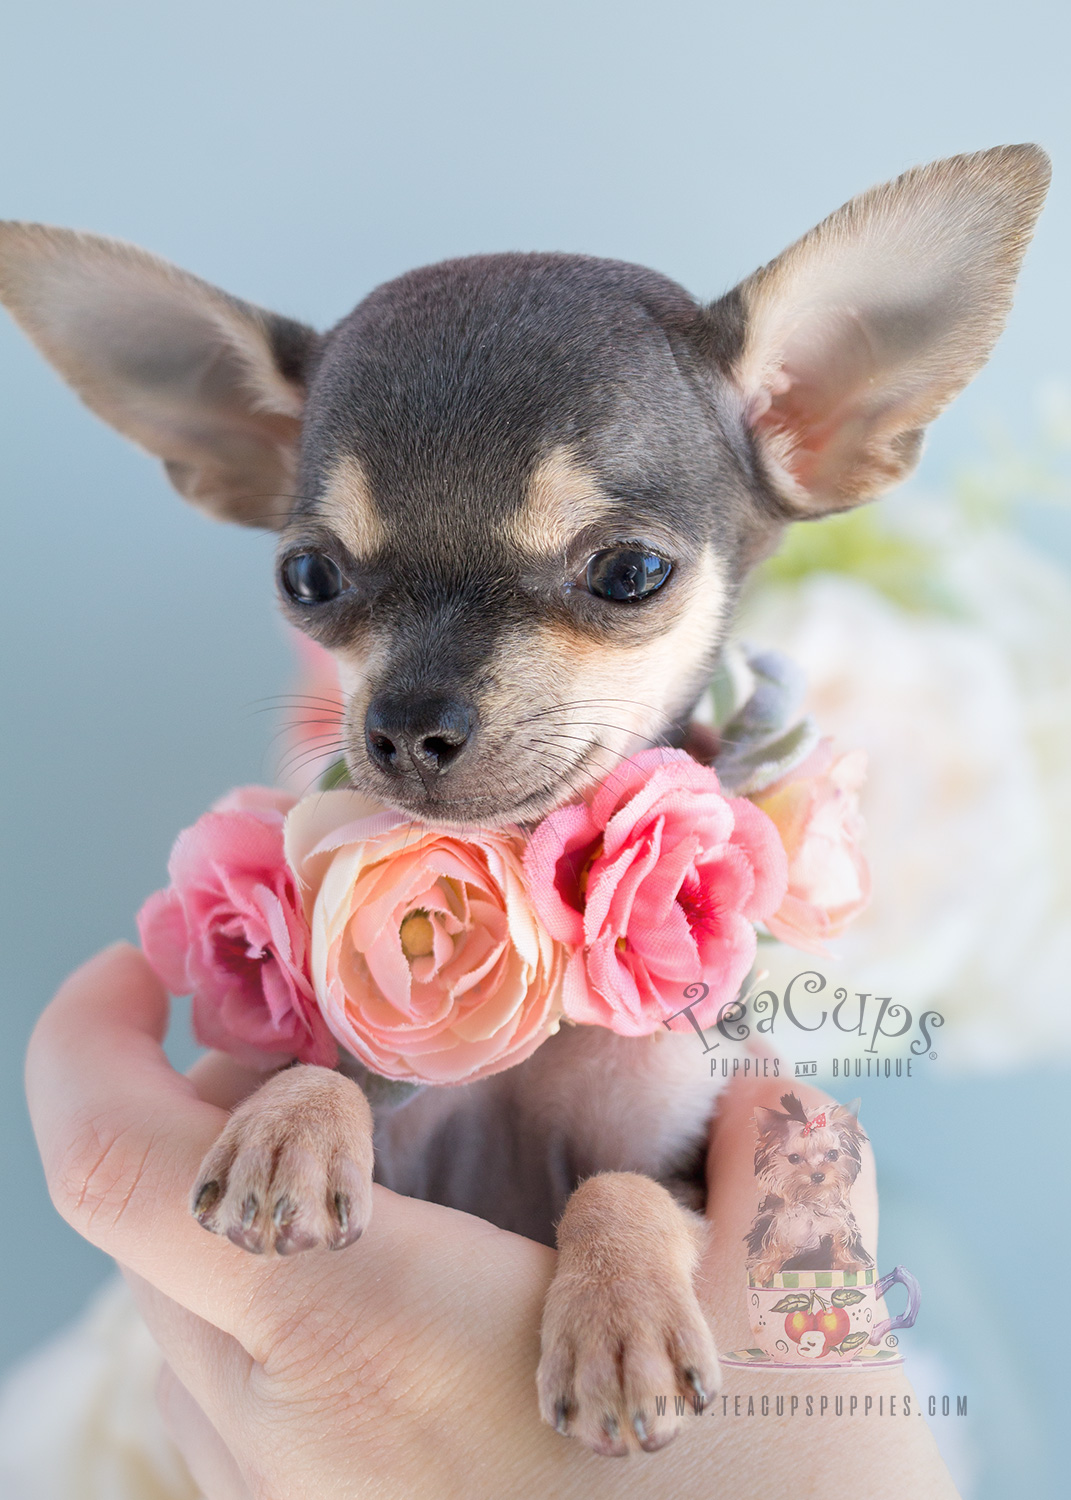 Blue Chihuahua Puppies | Teacups, Puppies & Boutique